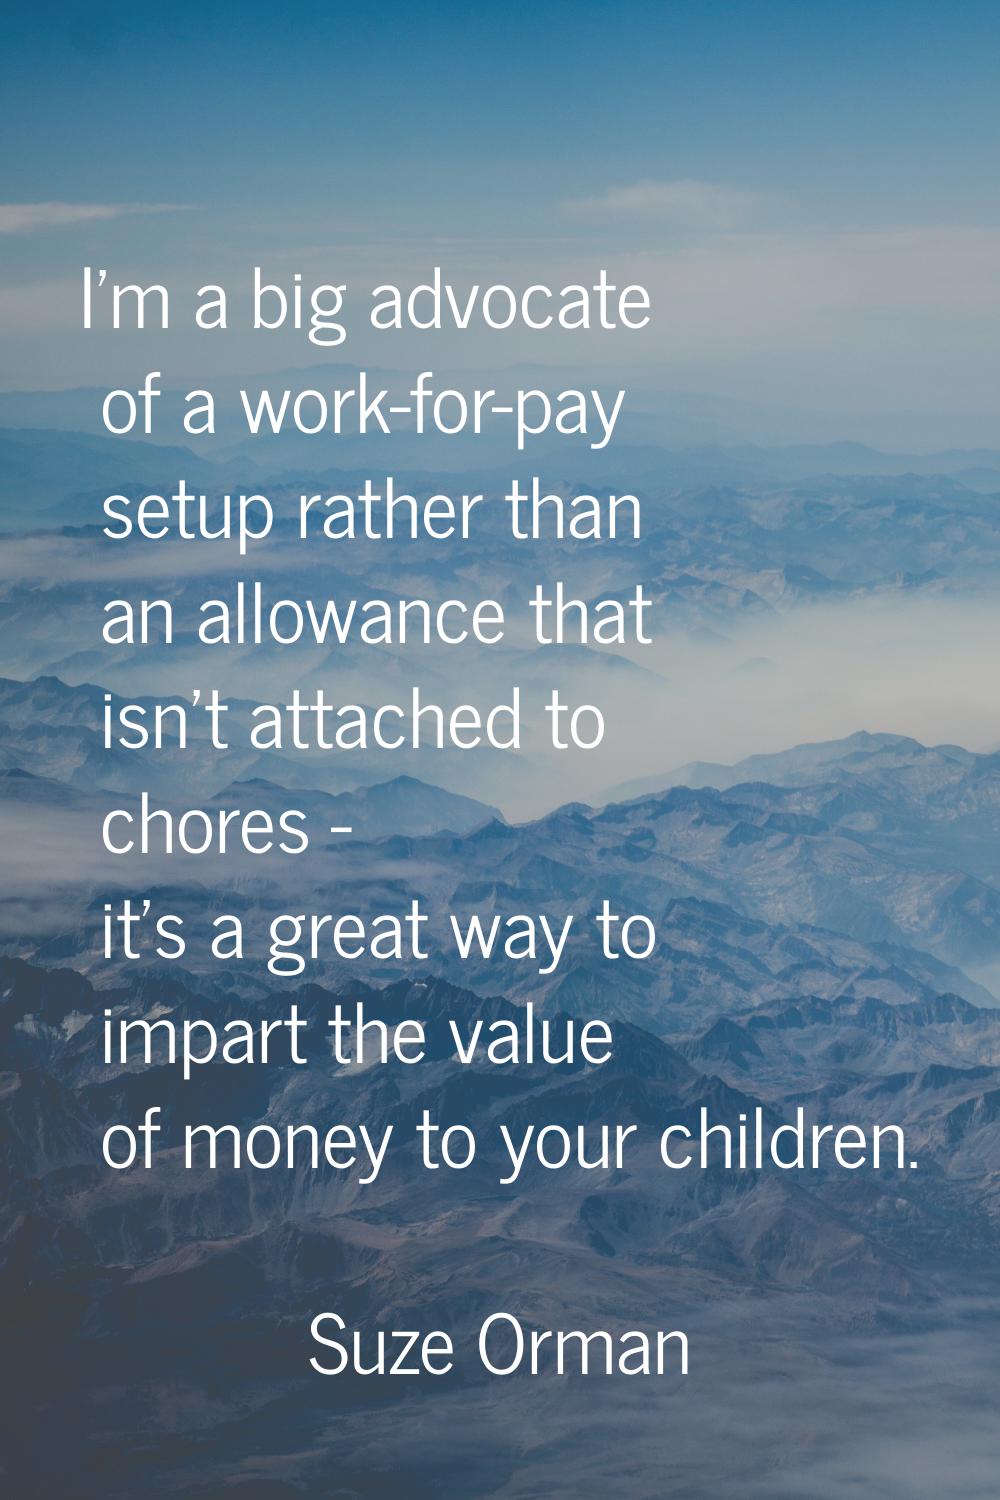 I'm a big advocate of a work-for-pay setup rather than an allowance that isn't attached to chores -